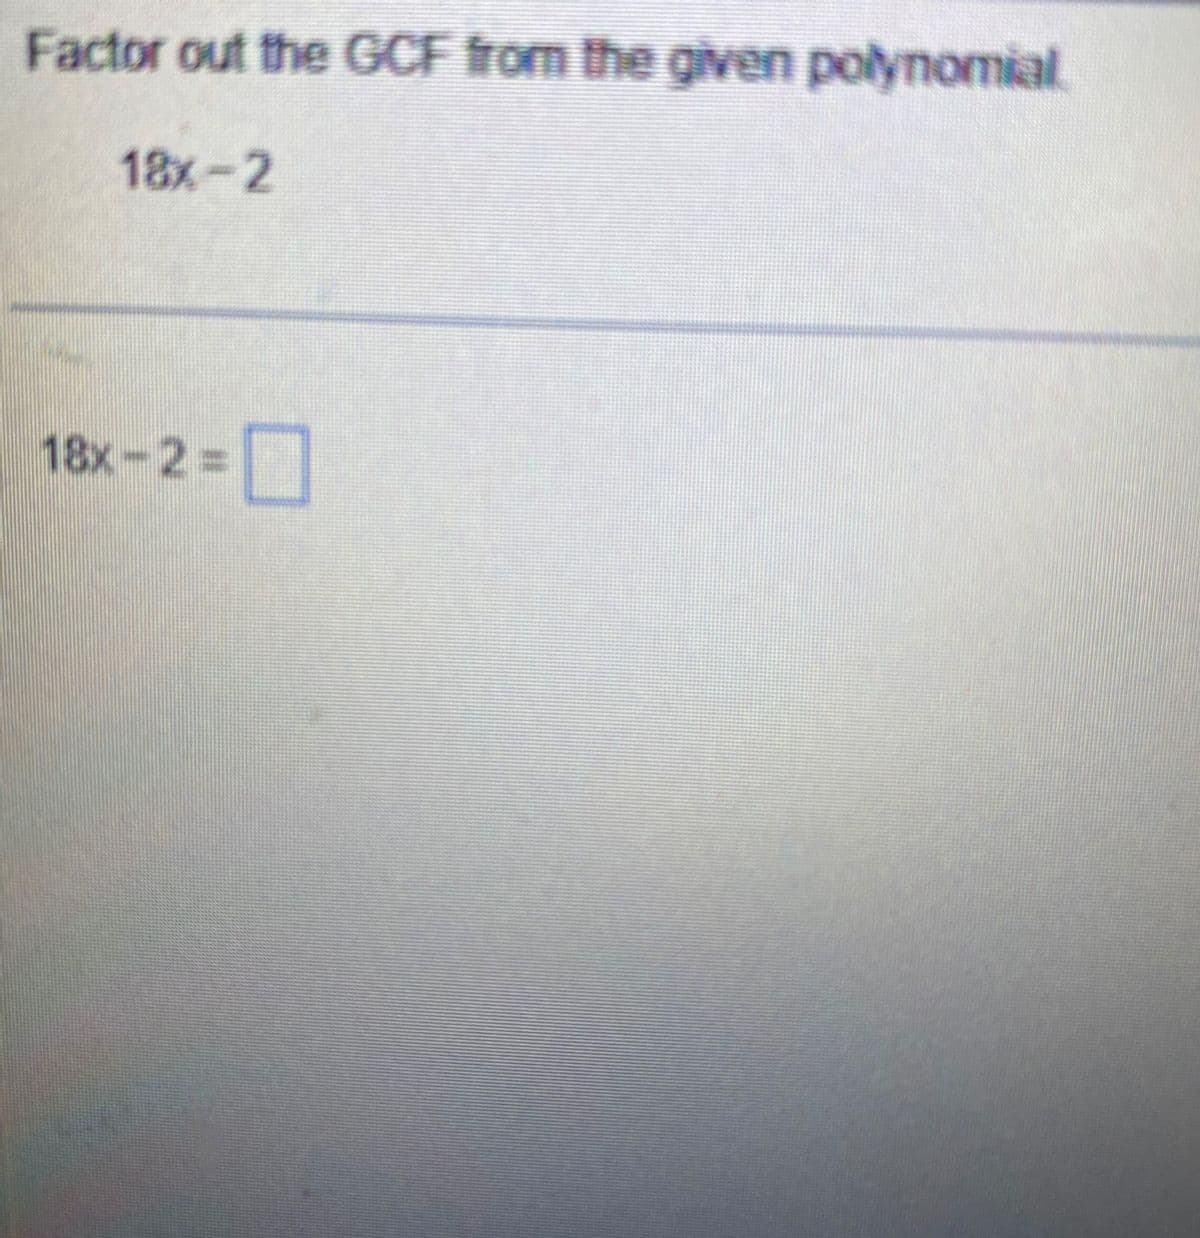 Factor out the GCF from the given polynomial
18x-2
18x - 2 = ☐